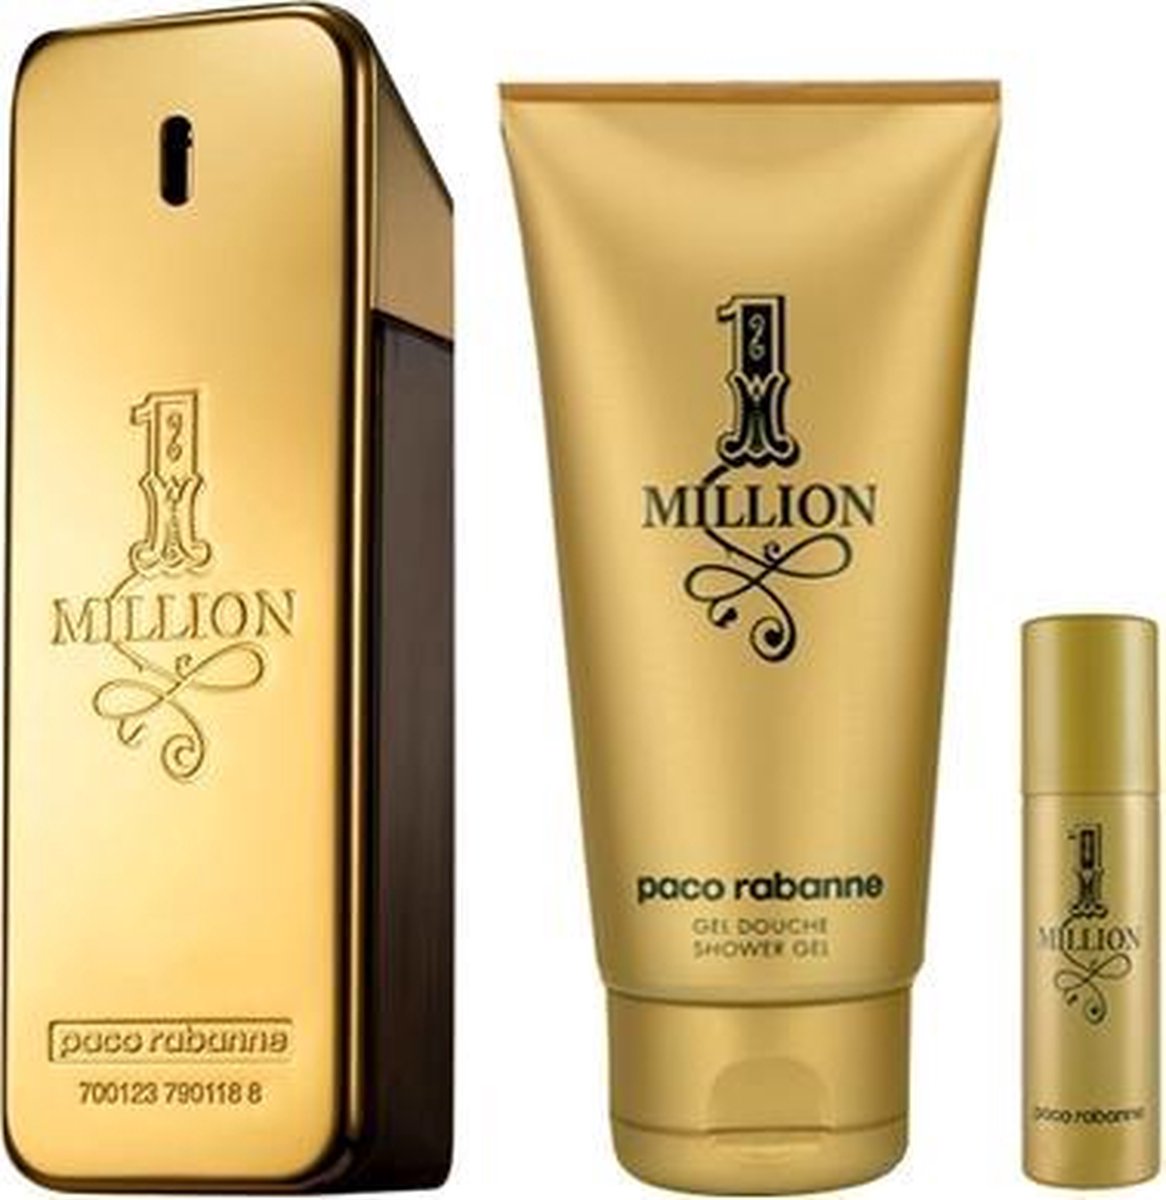 Cheapest place to buy paco rabanne one million